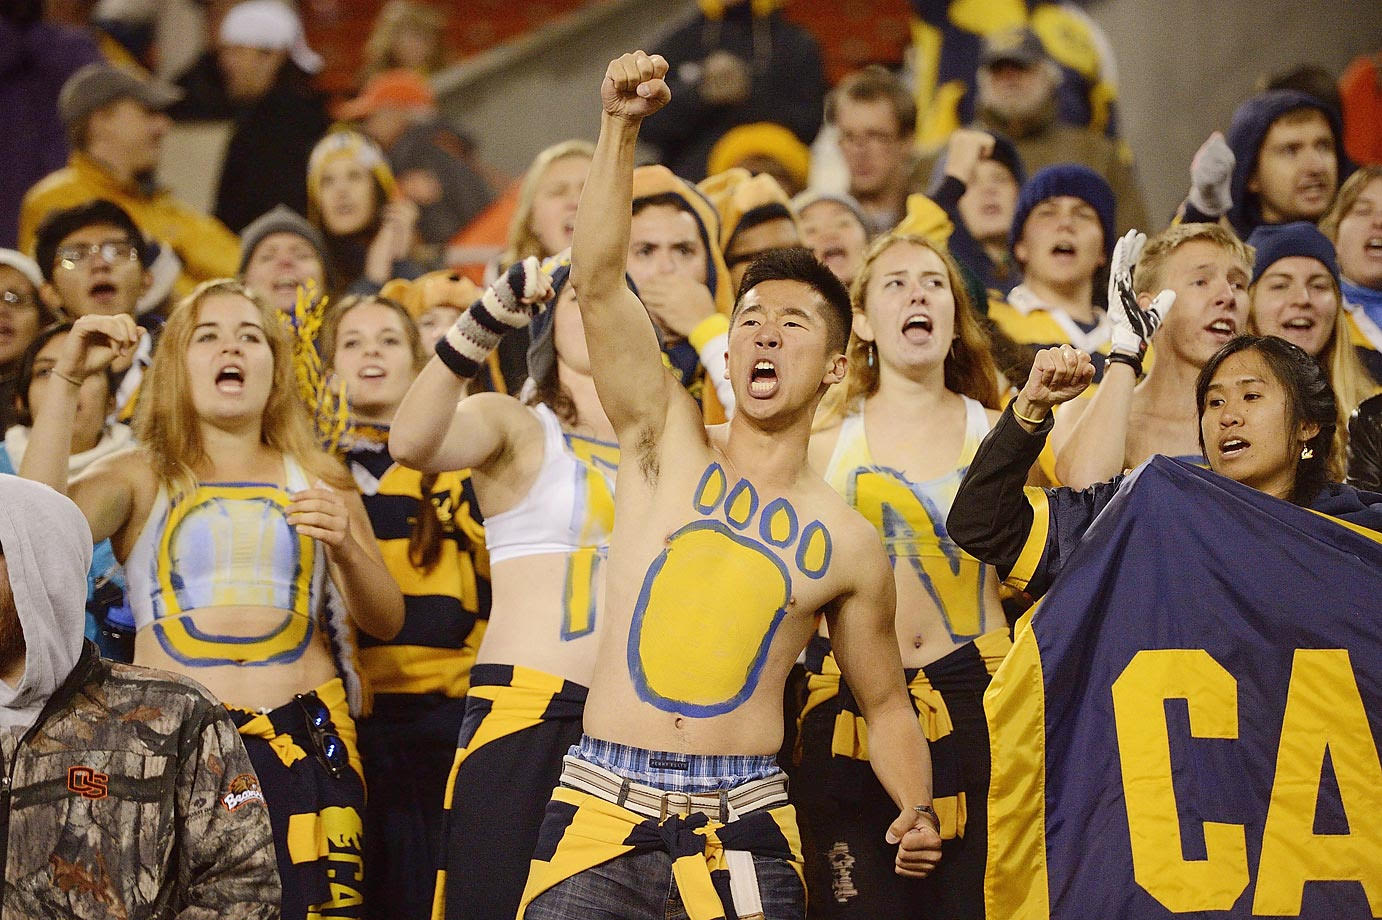 Cal sports fans cheering on team, dressed (or painted) in blue and gold.